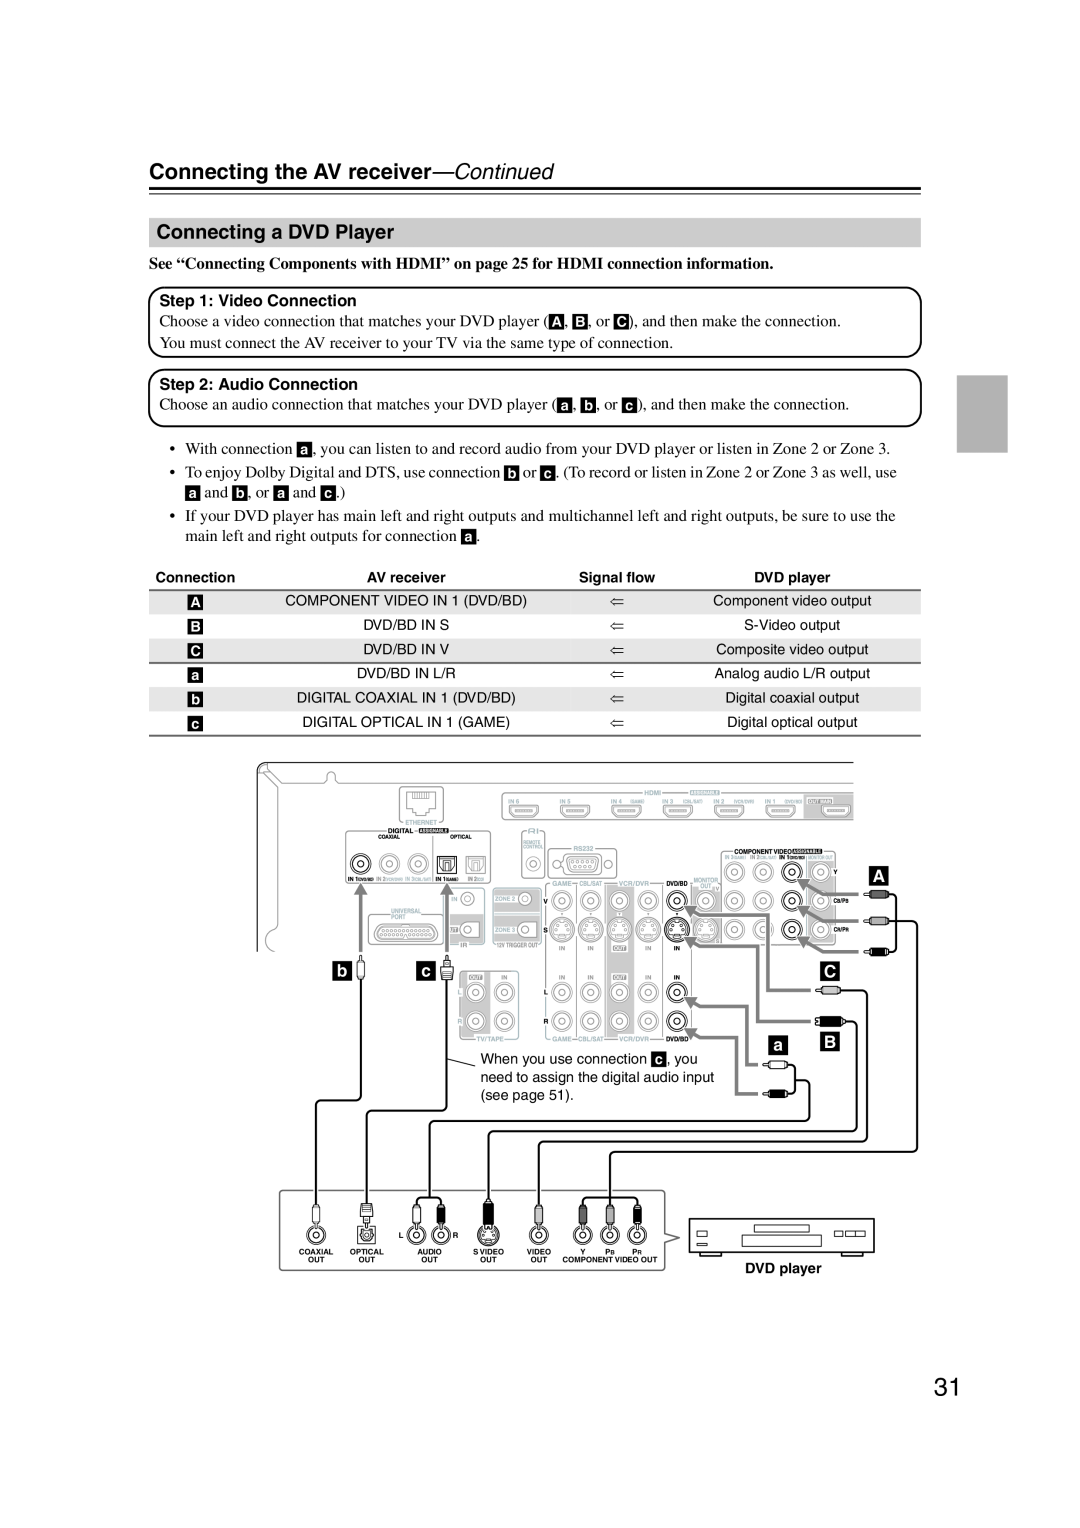 Onkyo TX-NR1007 instruction manual Connecting a DVD Player, Connecting the AV receiver—Continued, DVD player 